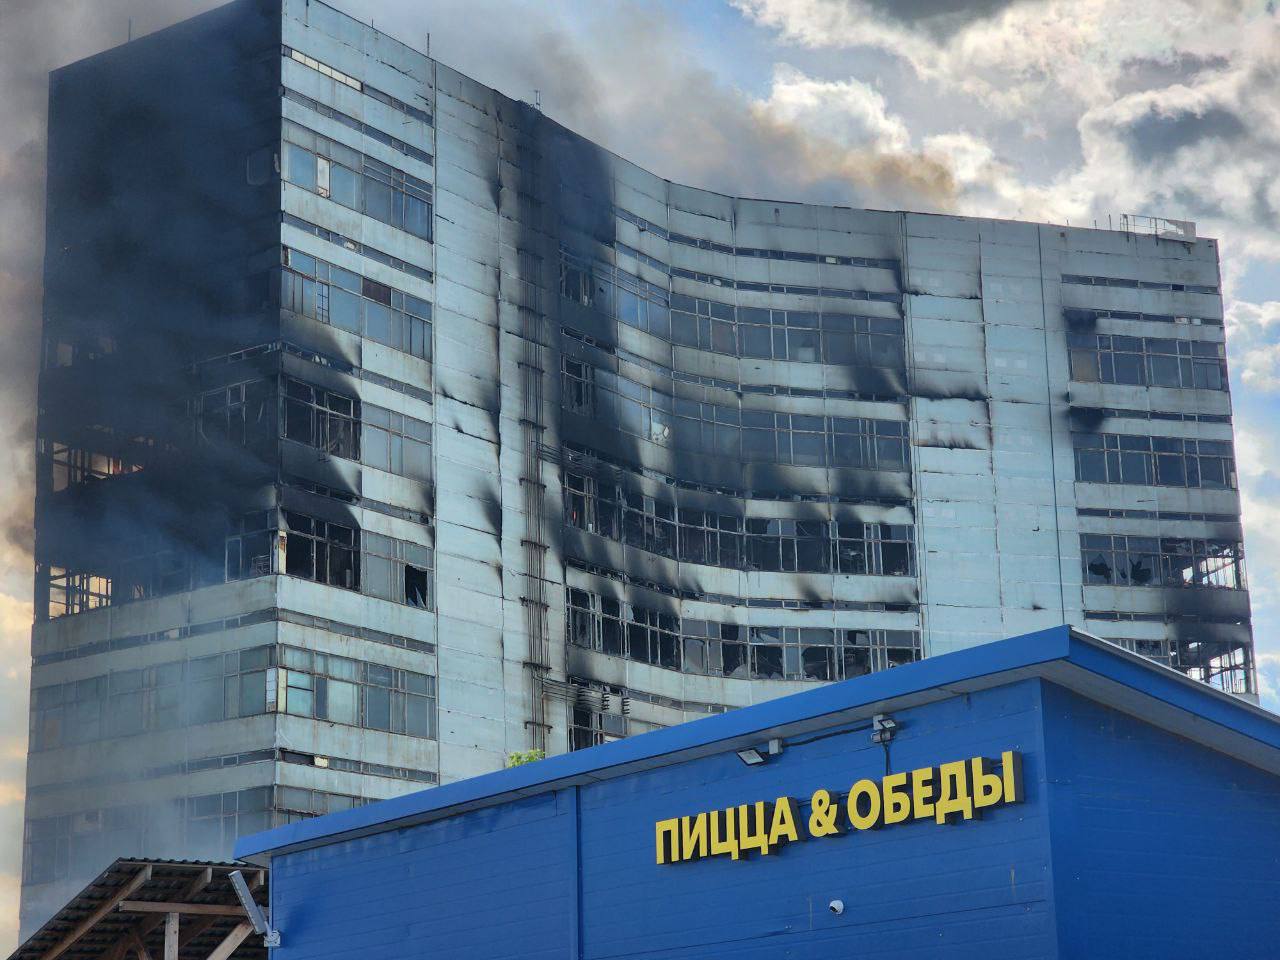 Multi-story building catches fire in Moscow Oblast, at least 8 people dead